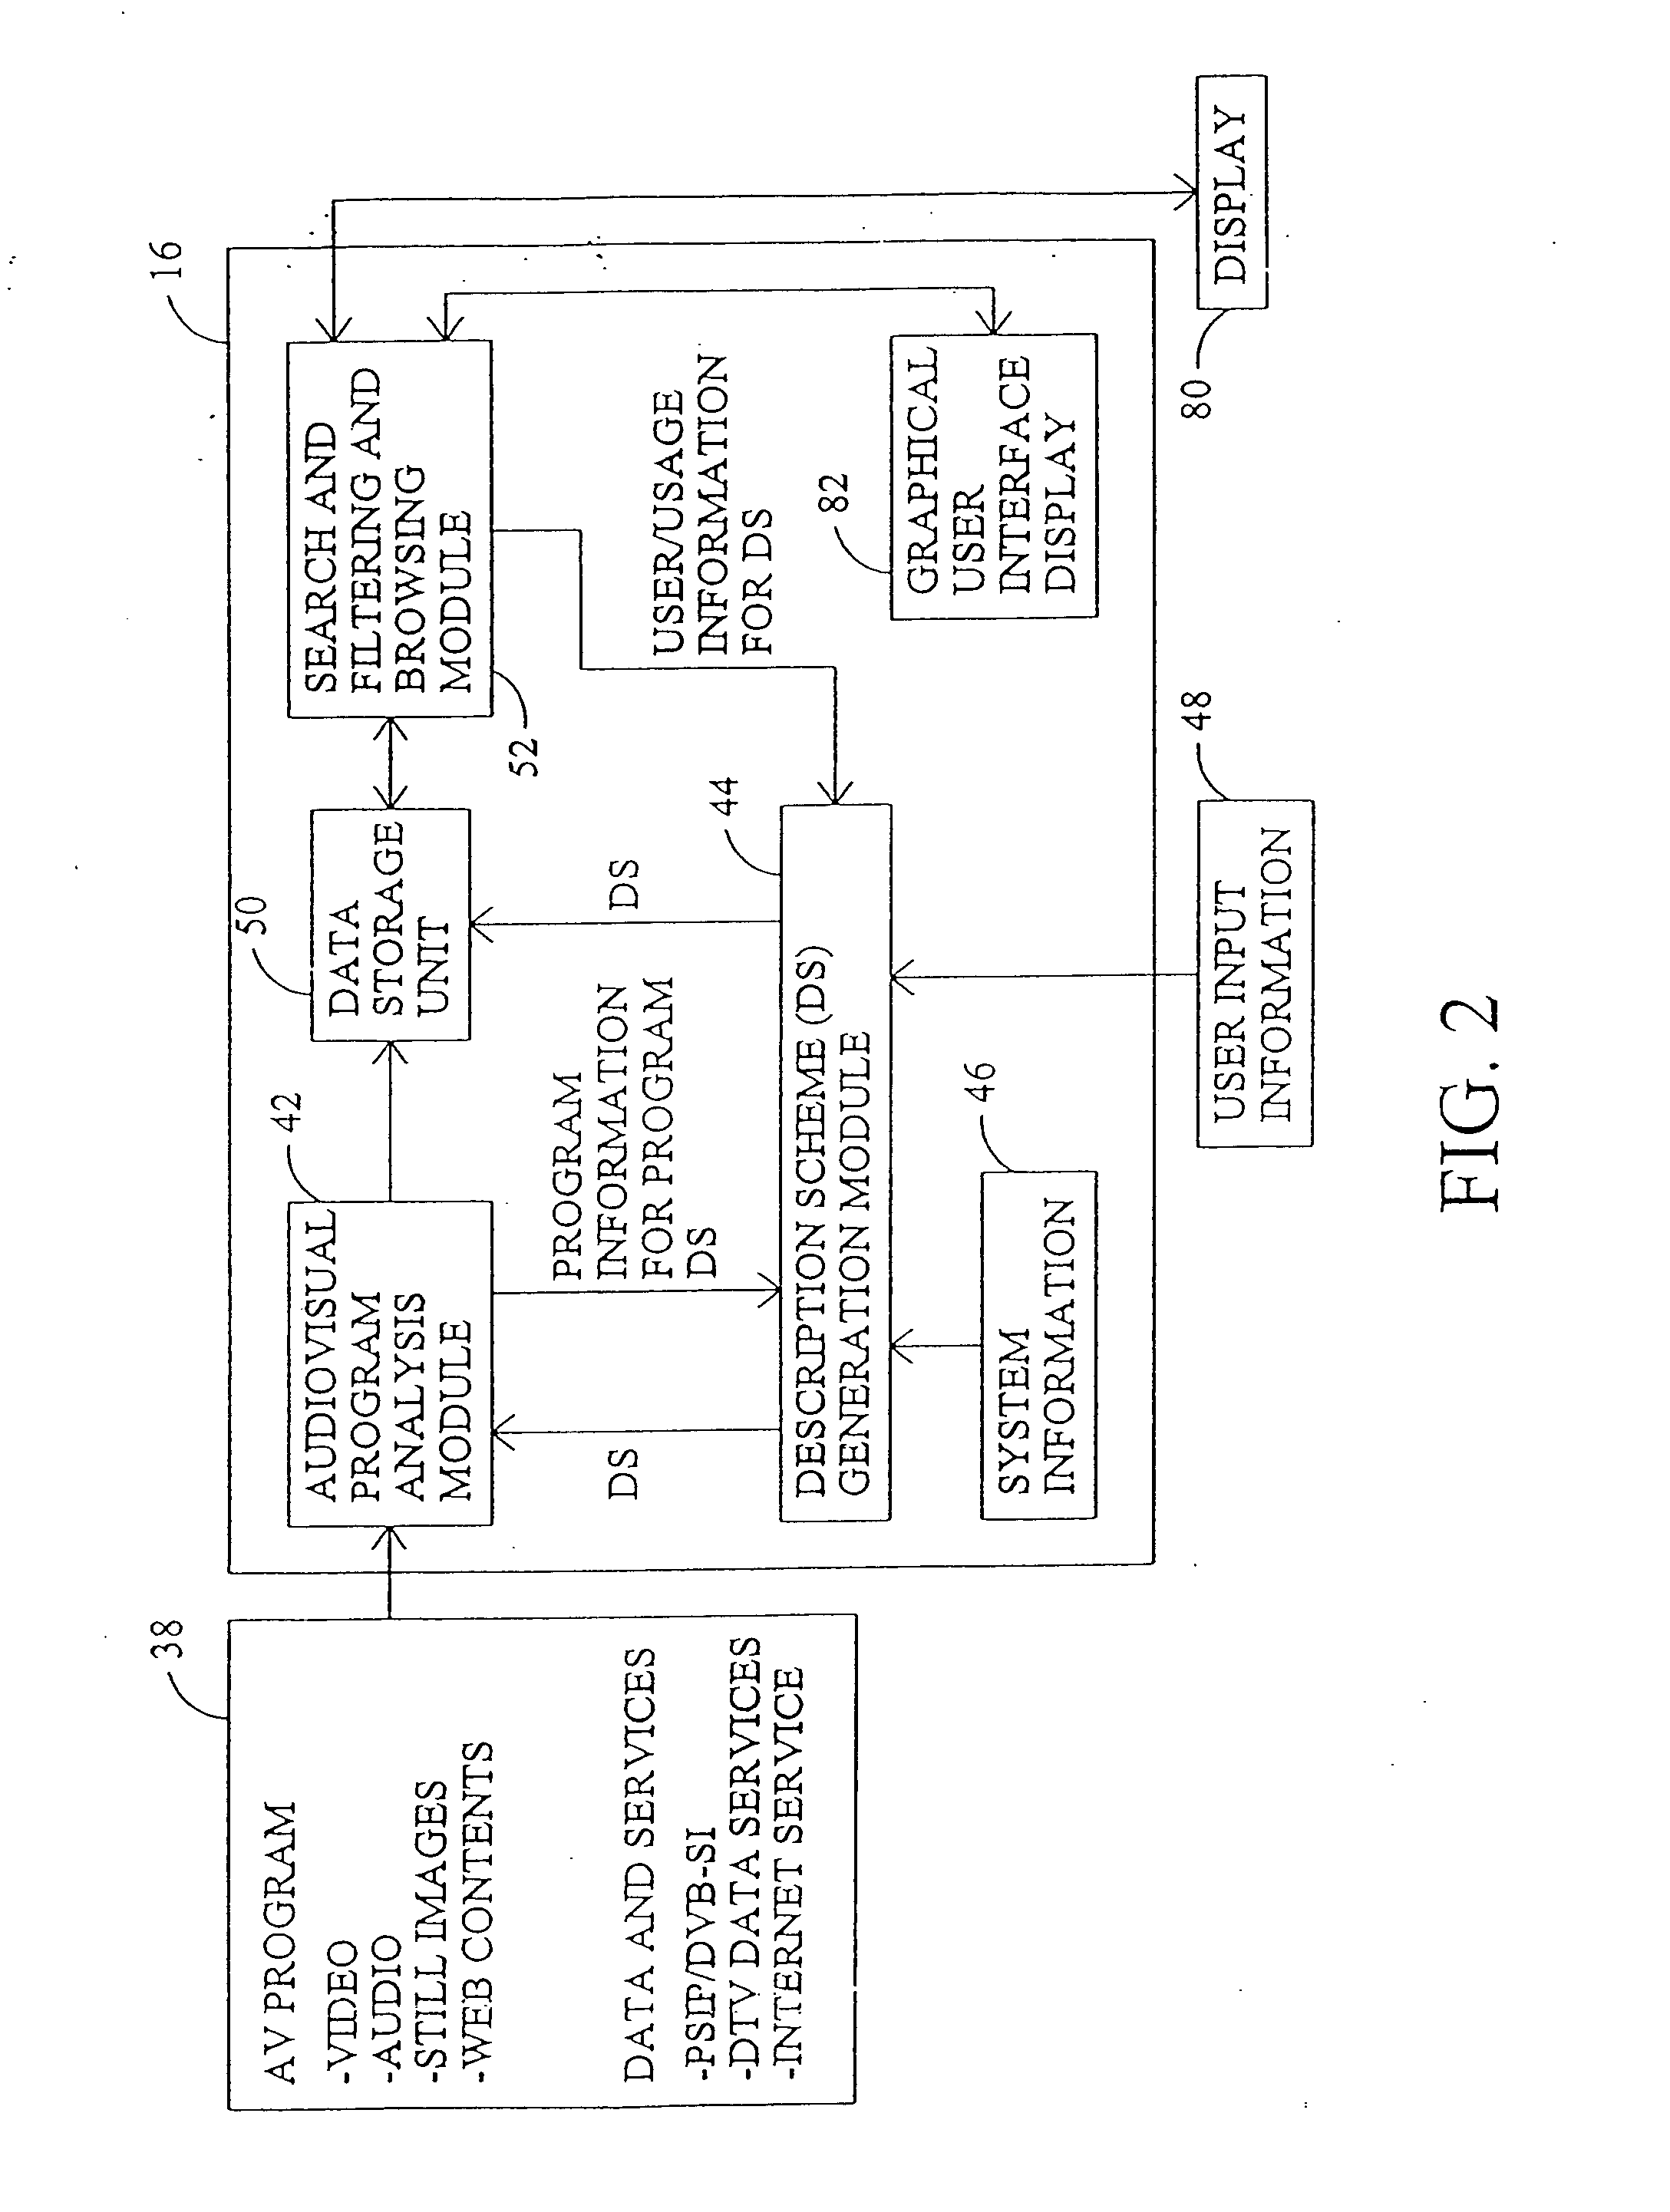 Audiovisual information management system with selective updating